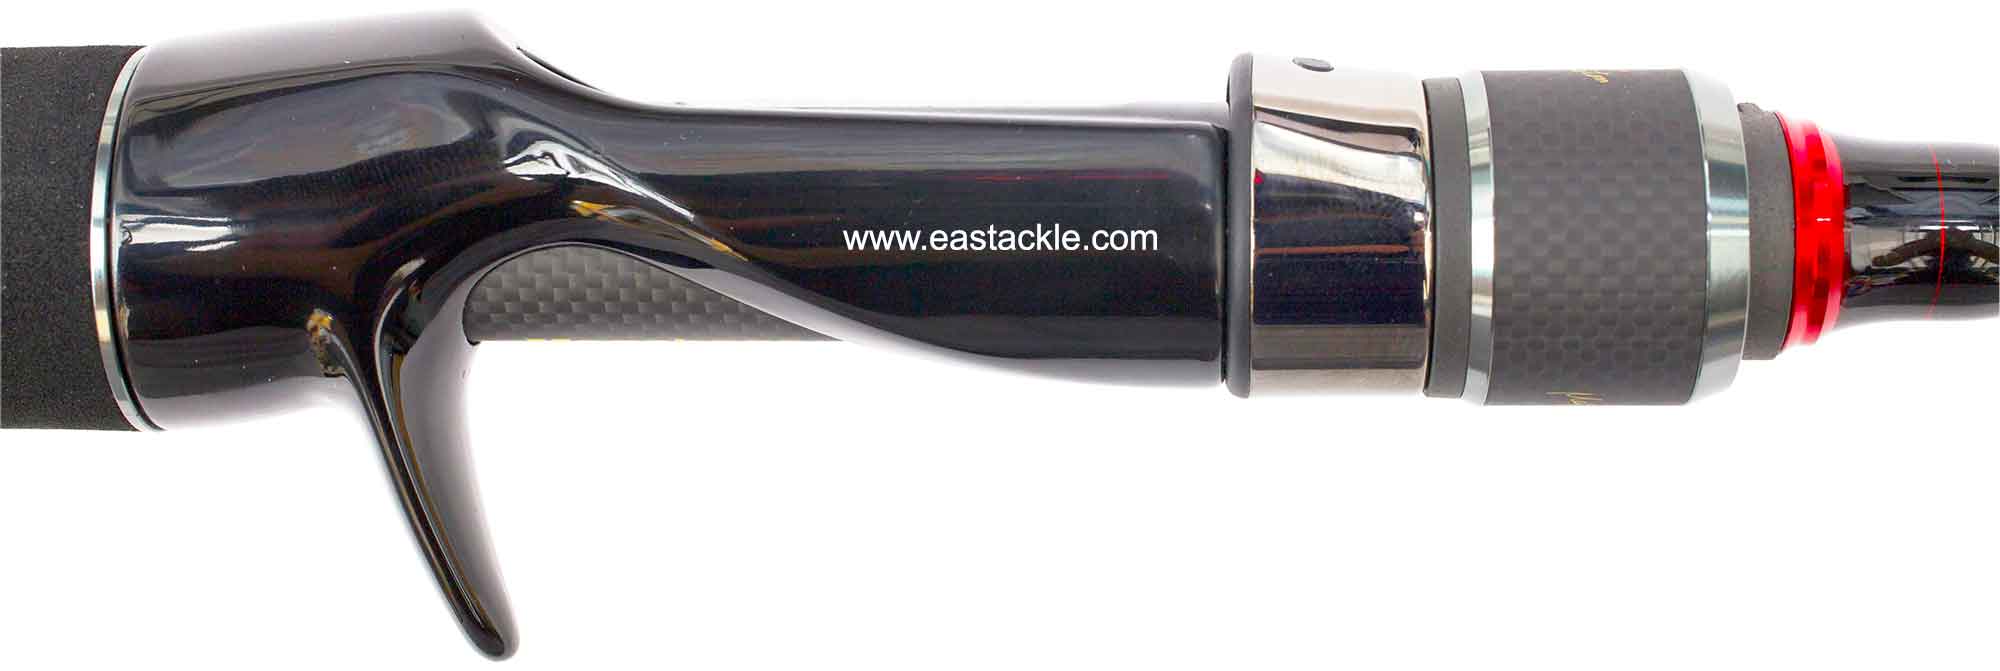 Megabass - Racing Condition World Edition - RCC-662M - Bait Casting Rod - Reel Seat Section (Side View)